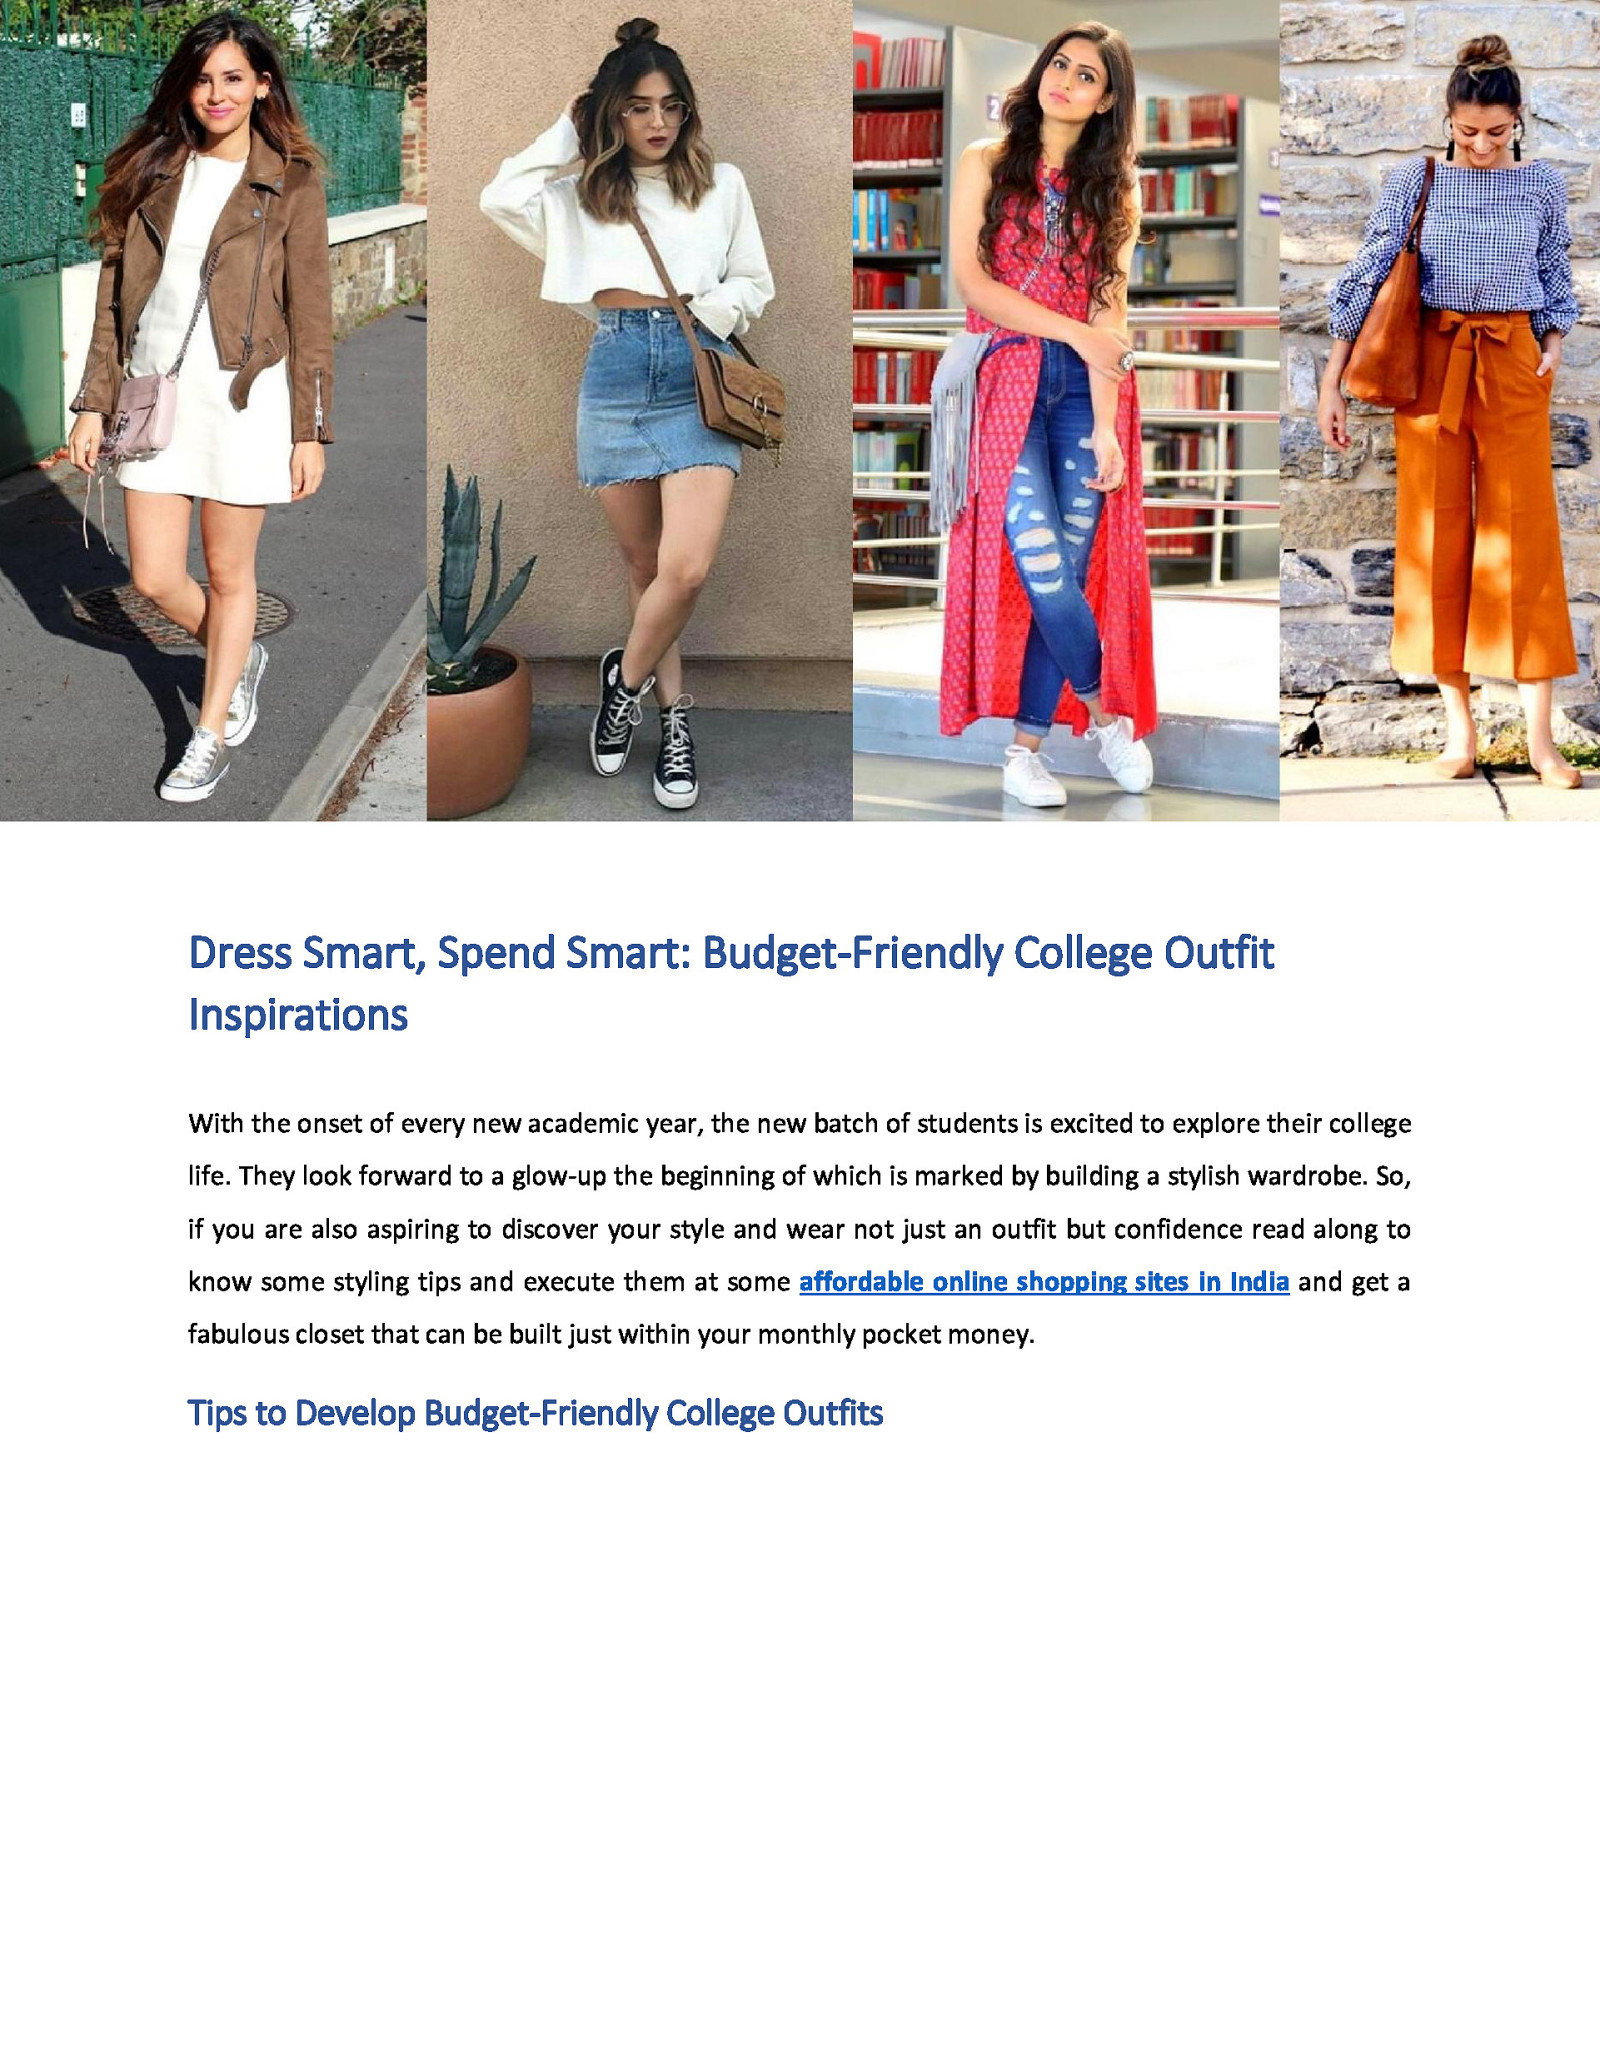 Dress Smart, Spend Smart: Budget-Friendly College Outfit Inspirations